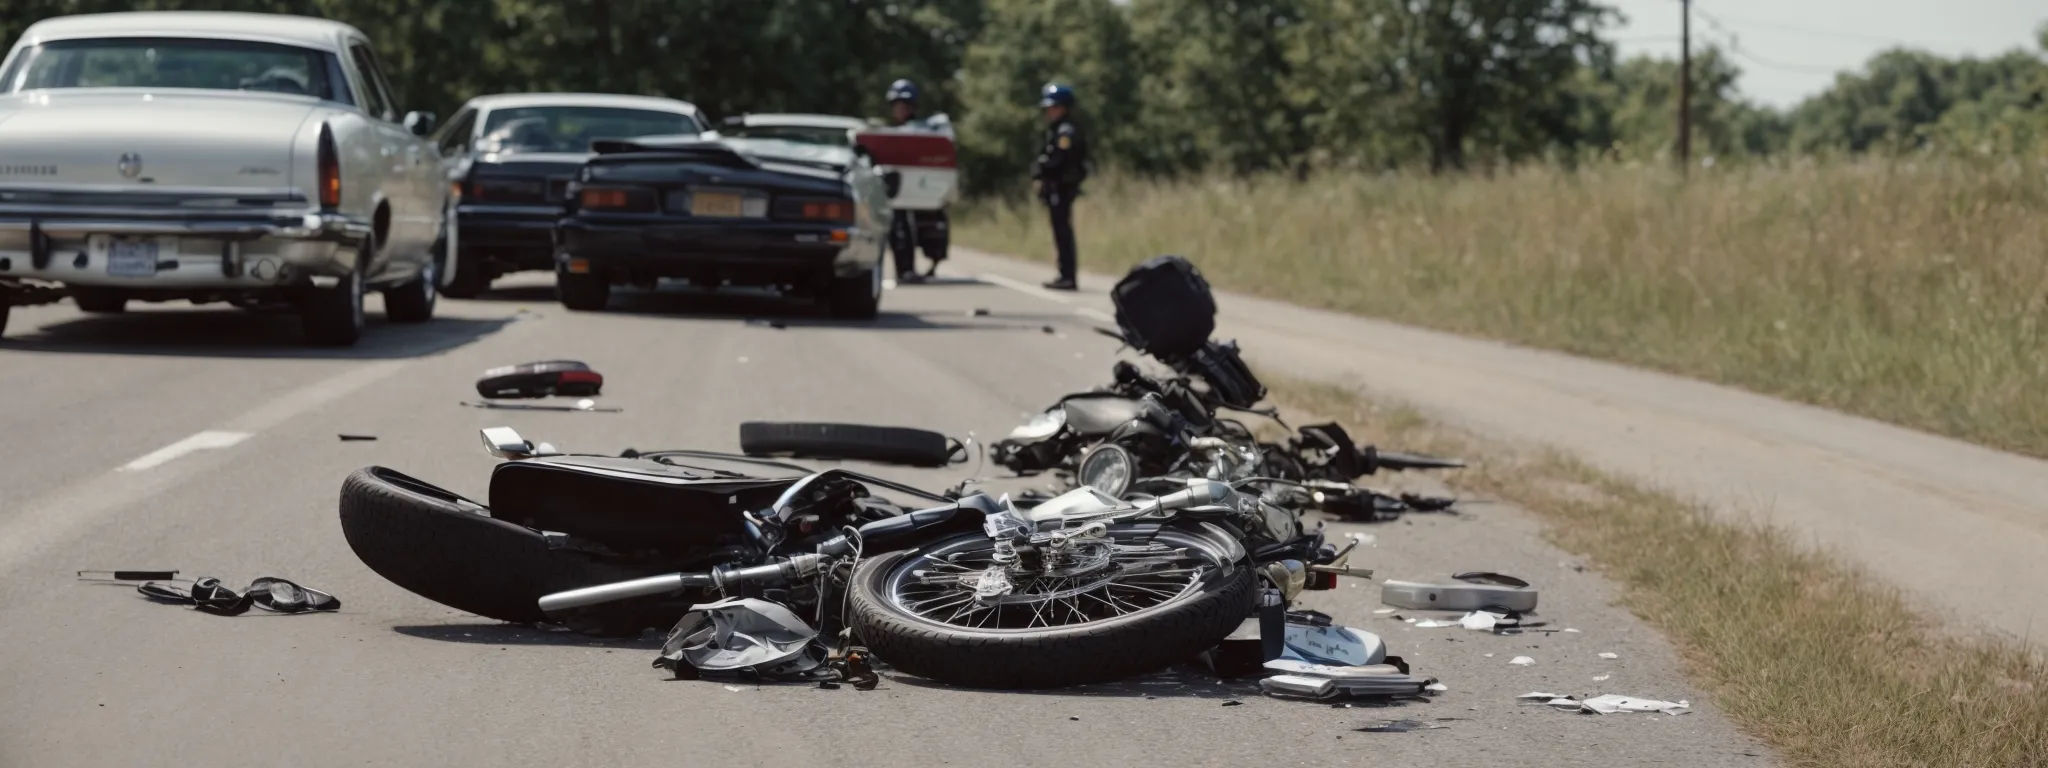 a motorcycle accident scene being investigated by police officers on an indiana road with law books in the foreground.